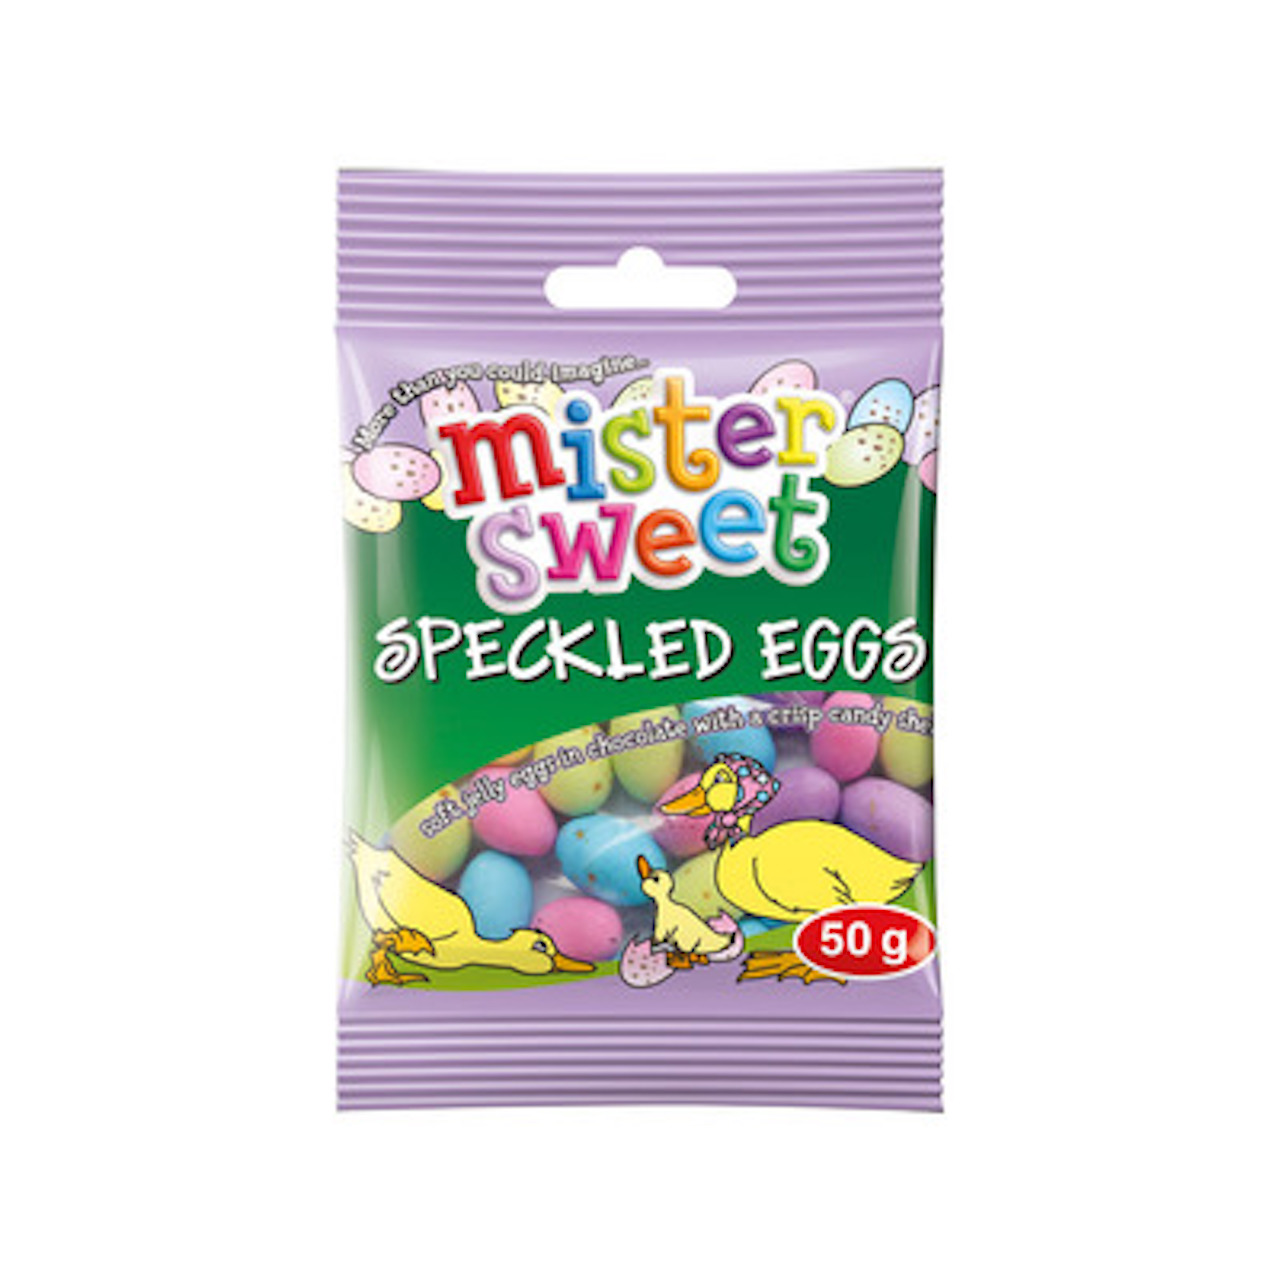 Mister Sweets Speckled Eggs 50g